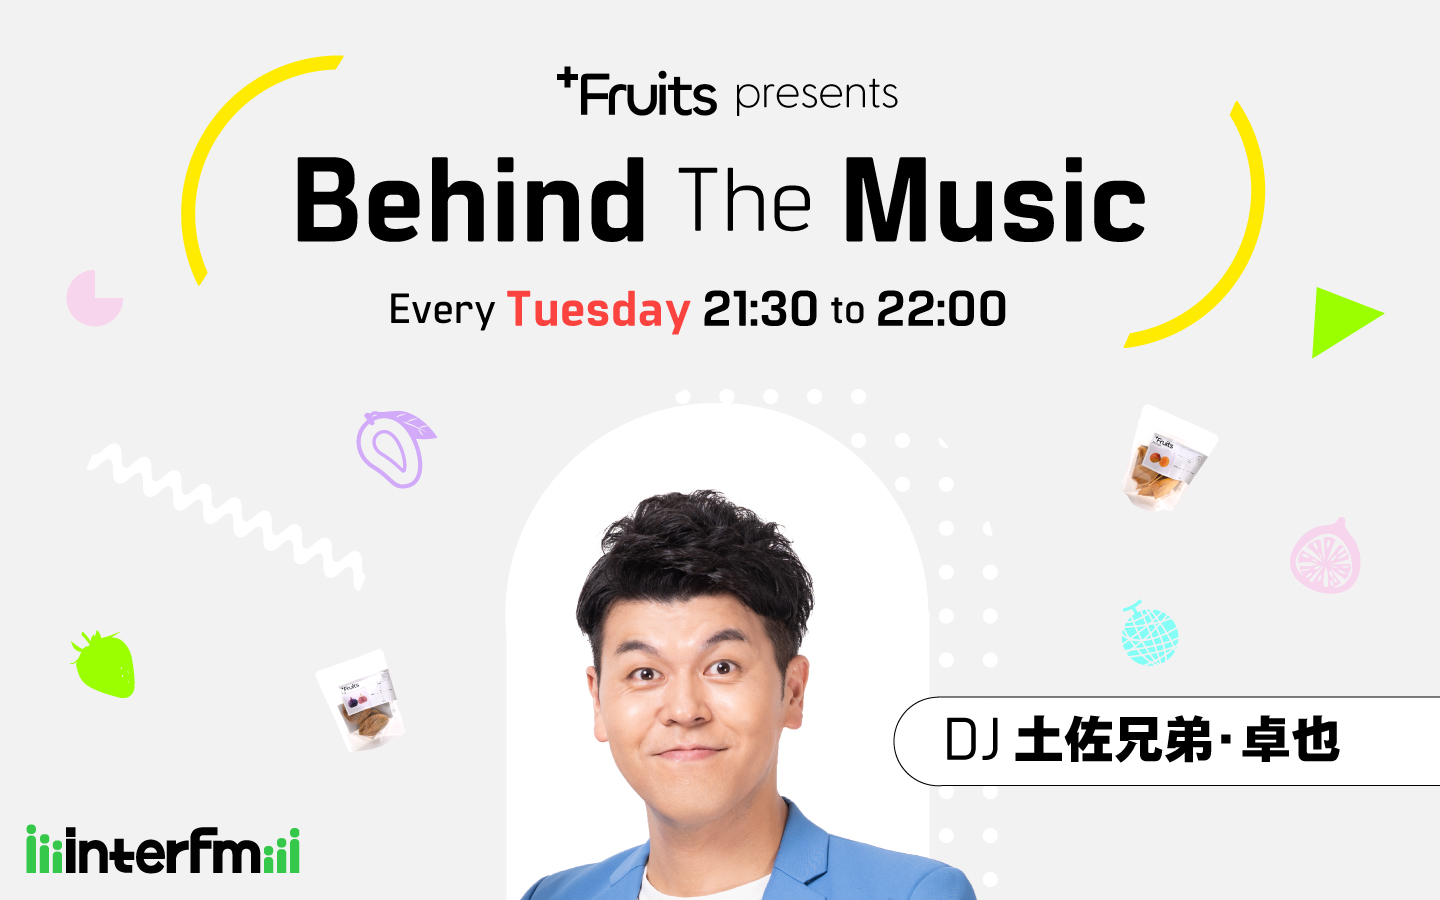 +Fruits presents Behind The Music